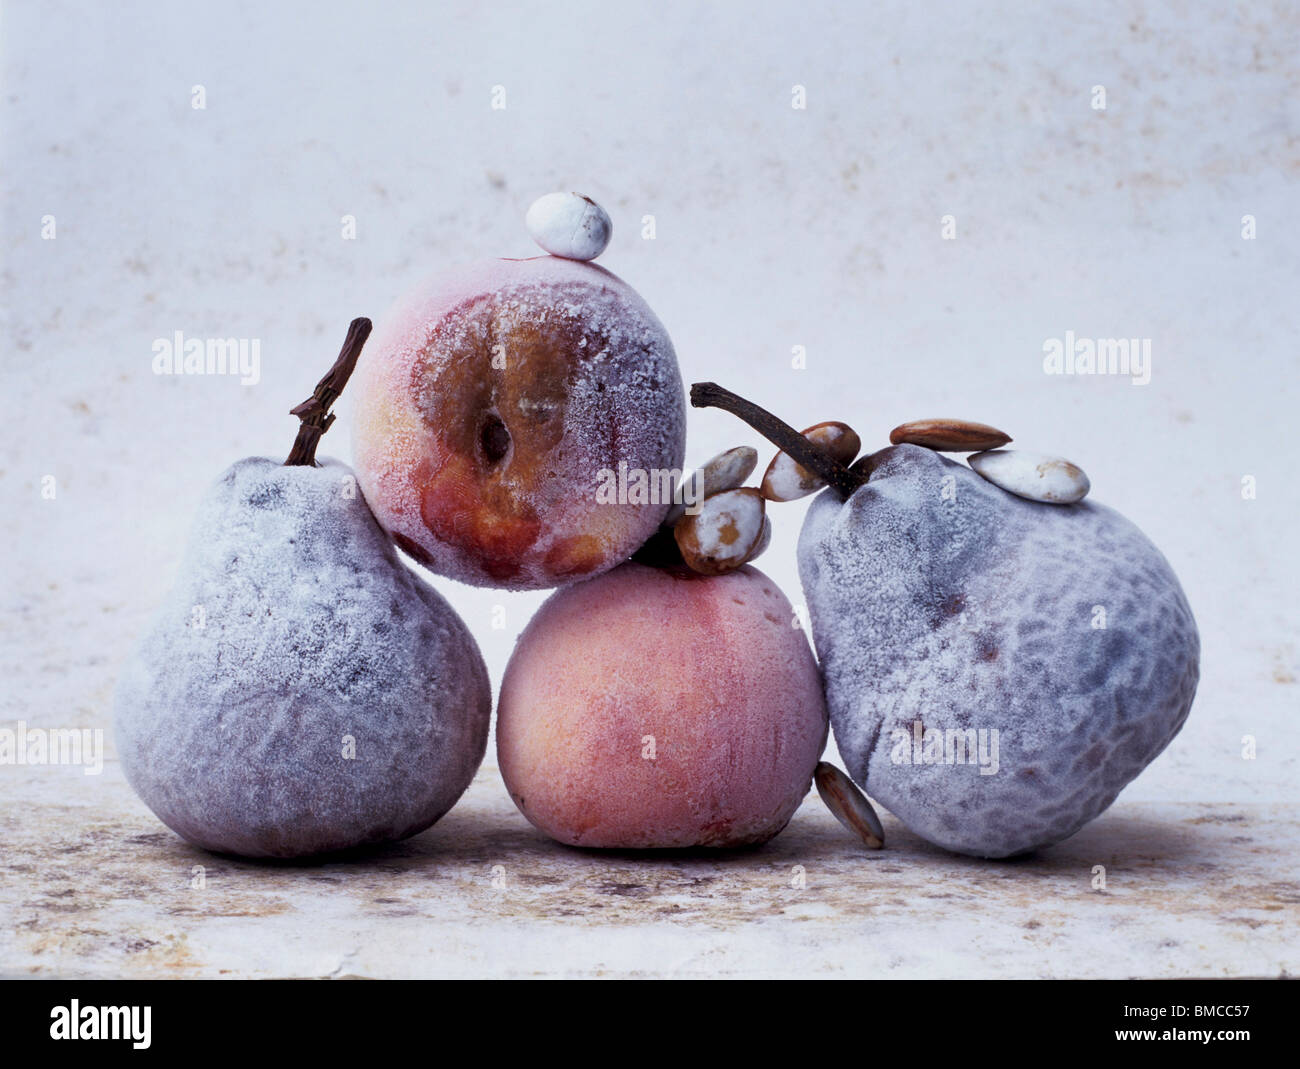 Rotten pears and apple Stock Photo